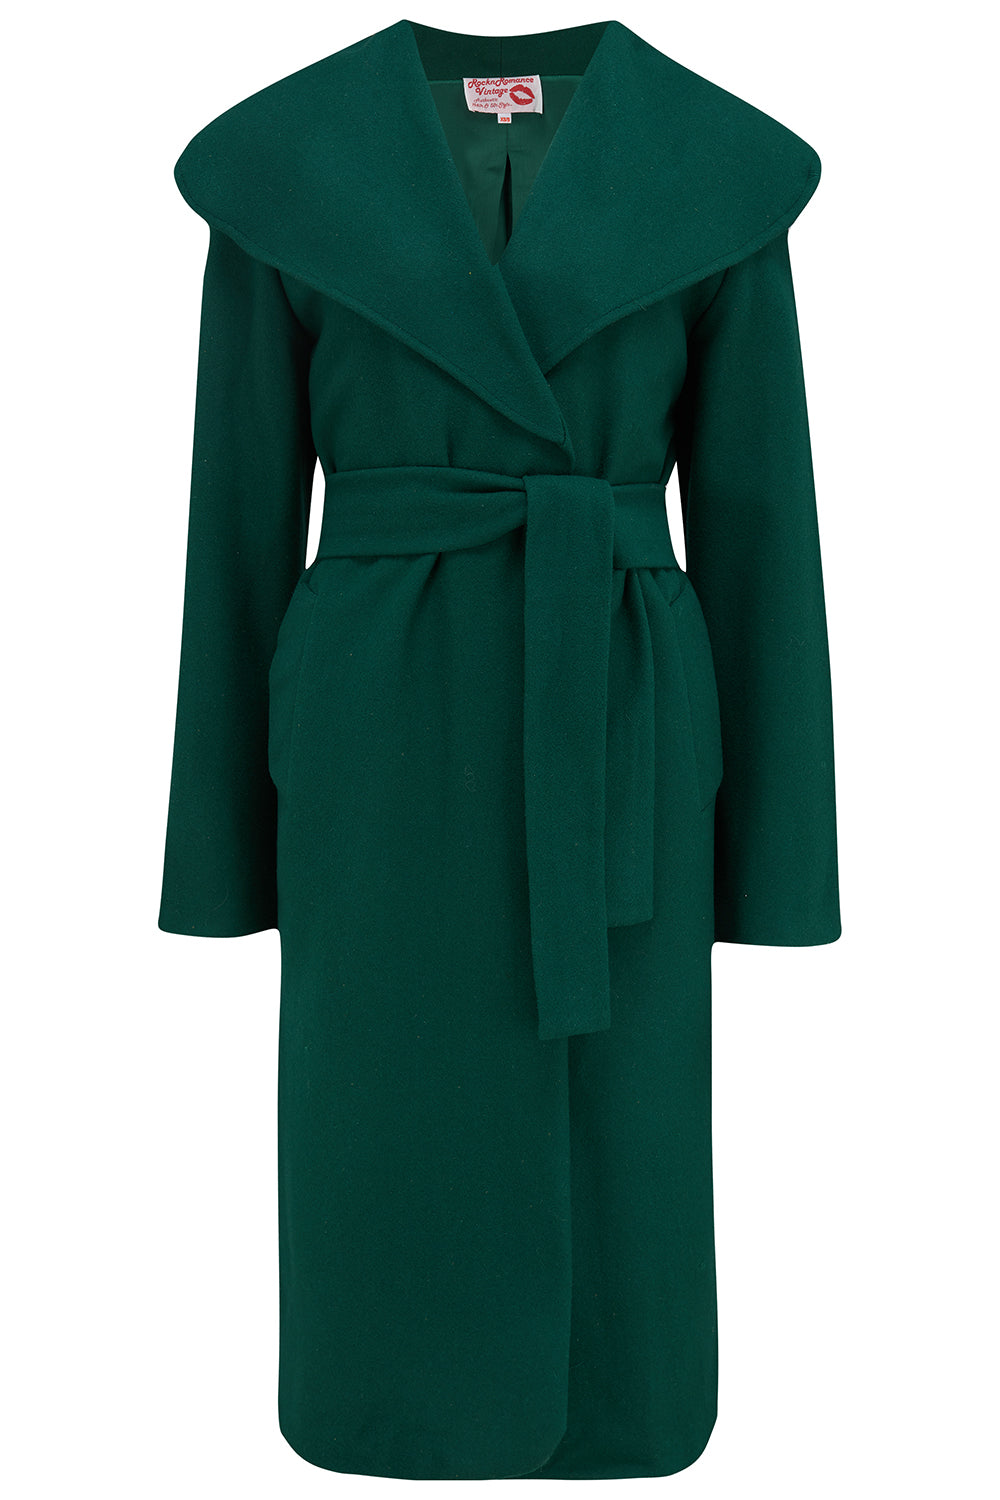 The "Monroe" Wrap Coat in Classic Green.. True & Authentic Late 1940s, Early 50s Vintage Style - True and authentic vintage style clothing, inspired by the Classic styles of CC41 , WW2 and the fun 1950s RocknRoll era, for everyday wear plus events like Goodwood Revival, Twinwood Festival and Viva Las Vegas Rockabilly Weekend Rock n Romance Rock n Romance